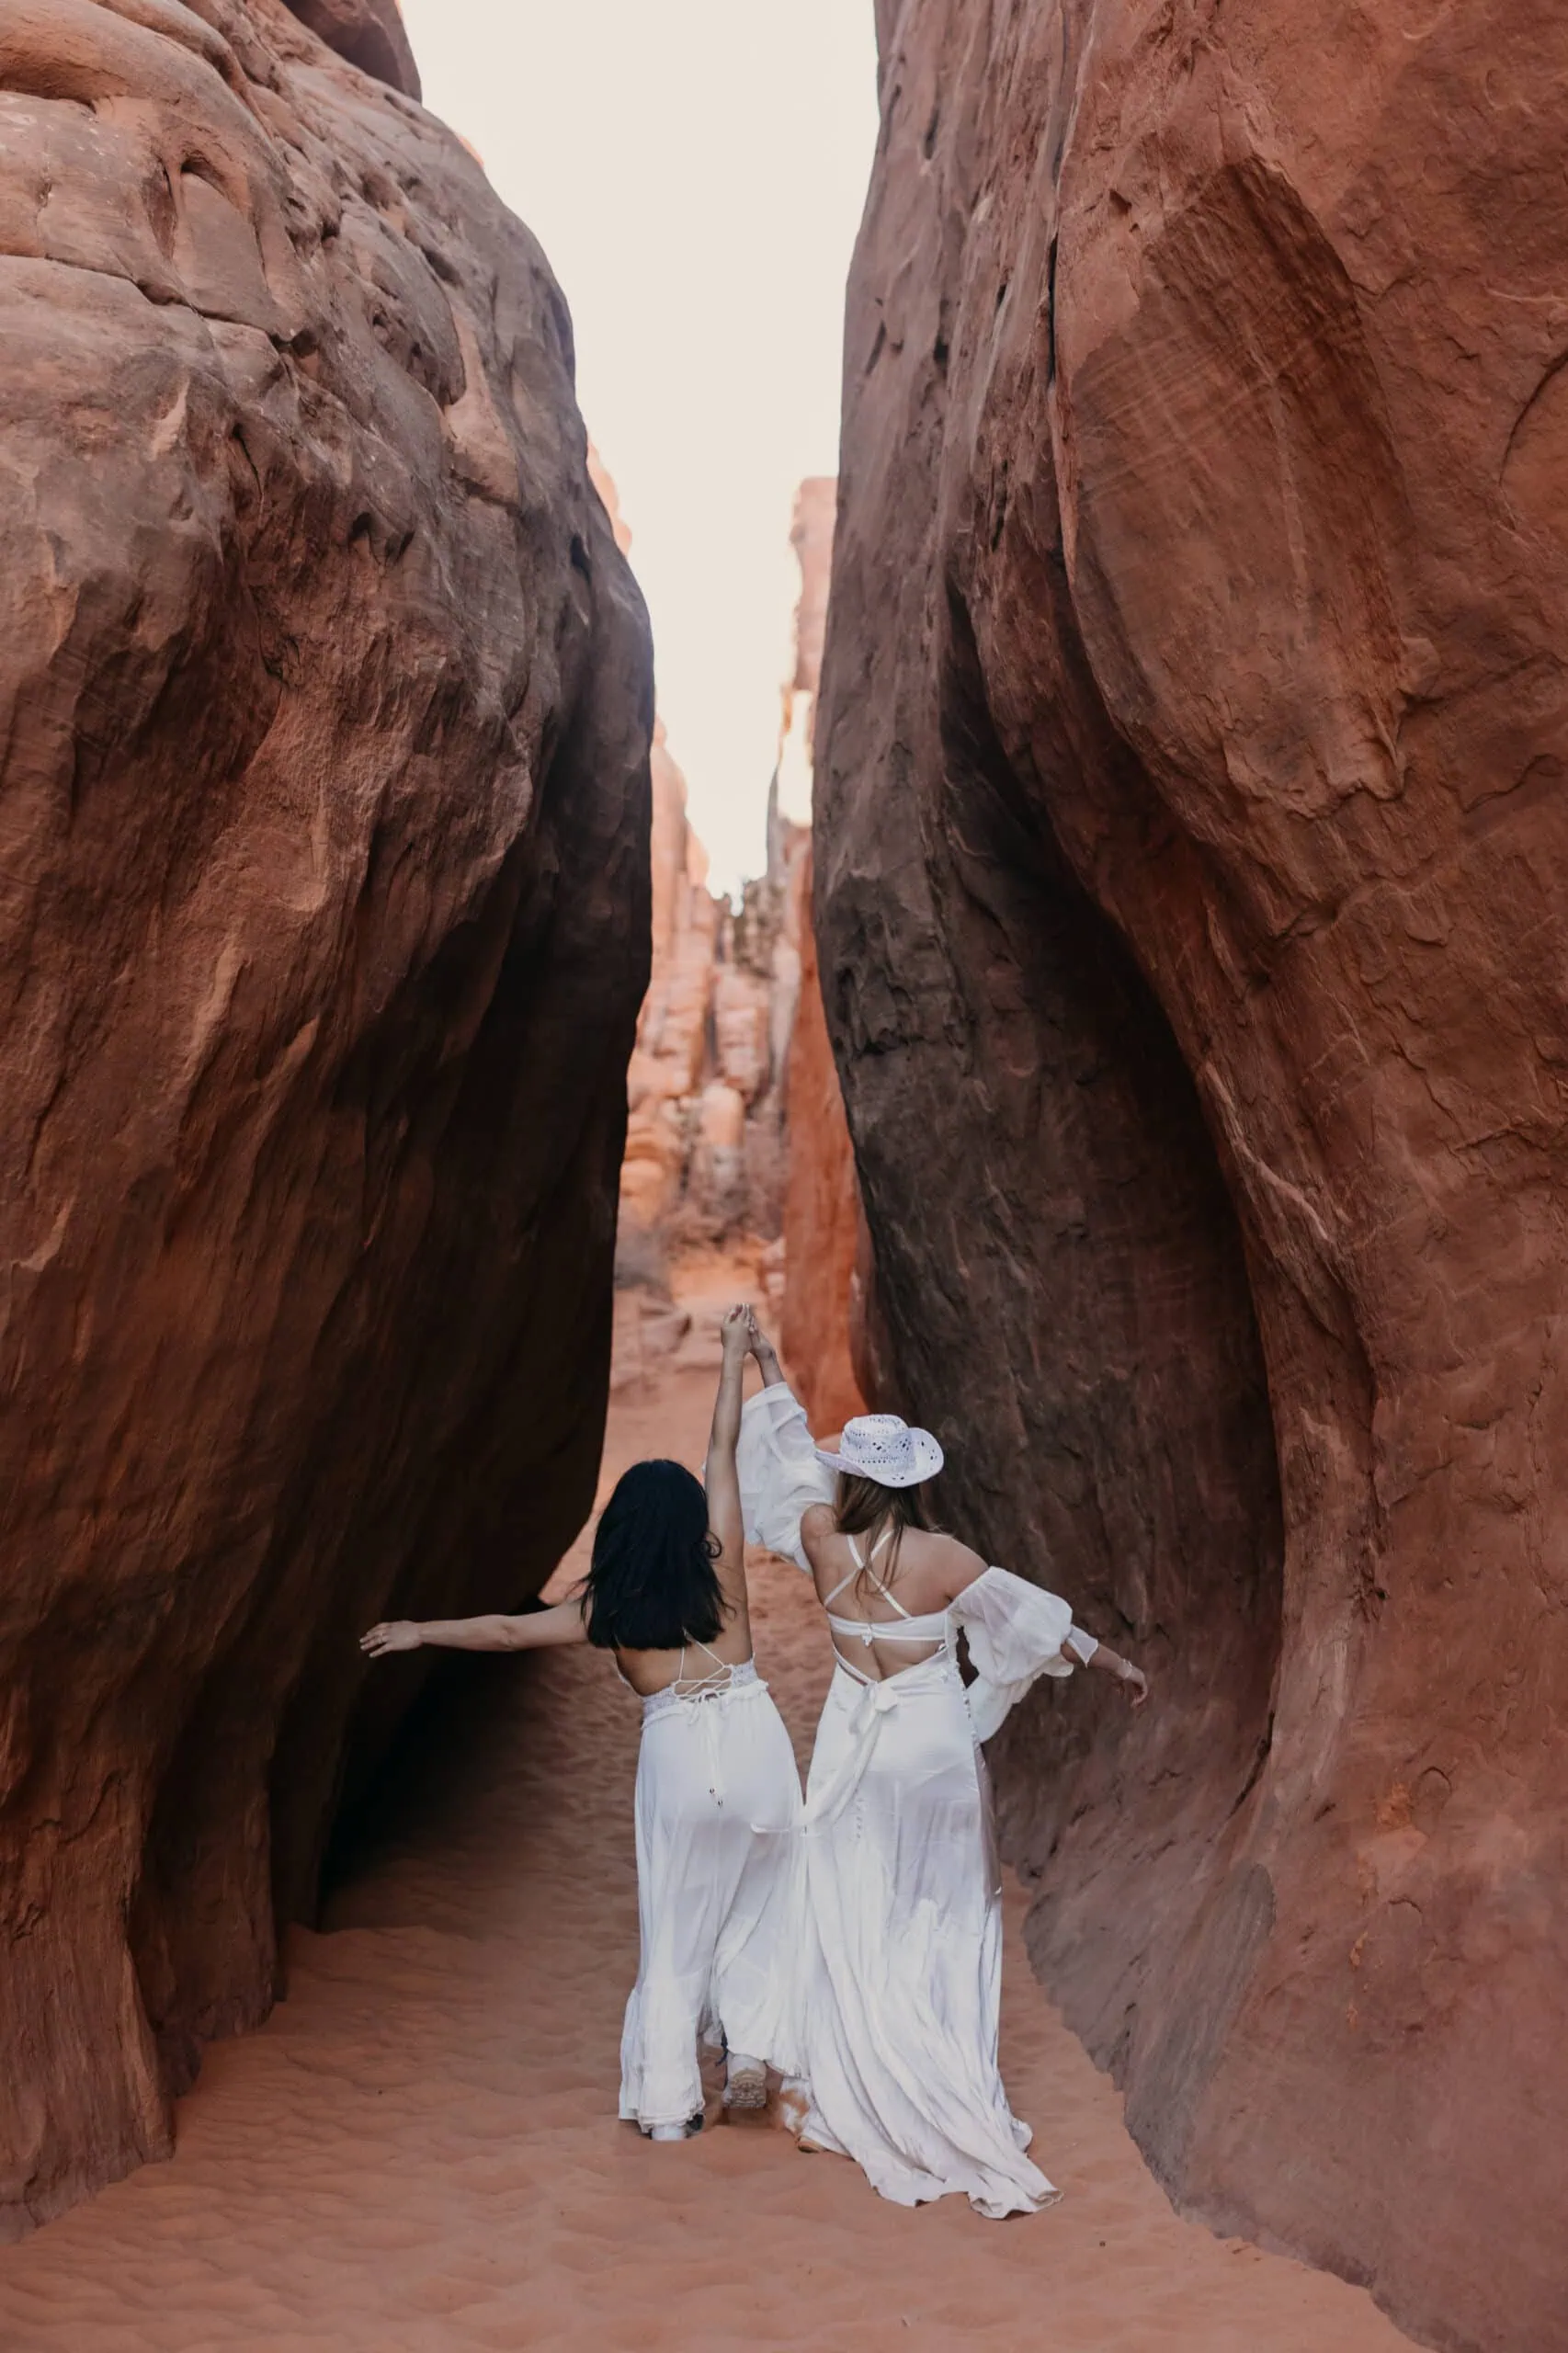 Two brides walk through the sand together in Arches National Park.